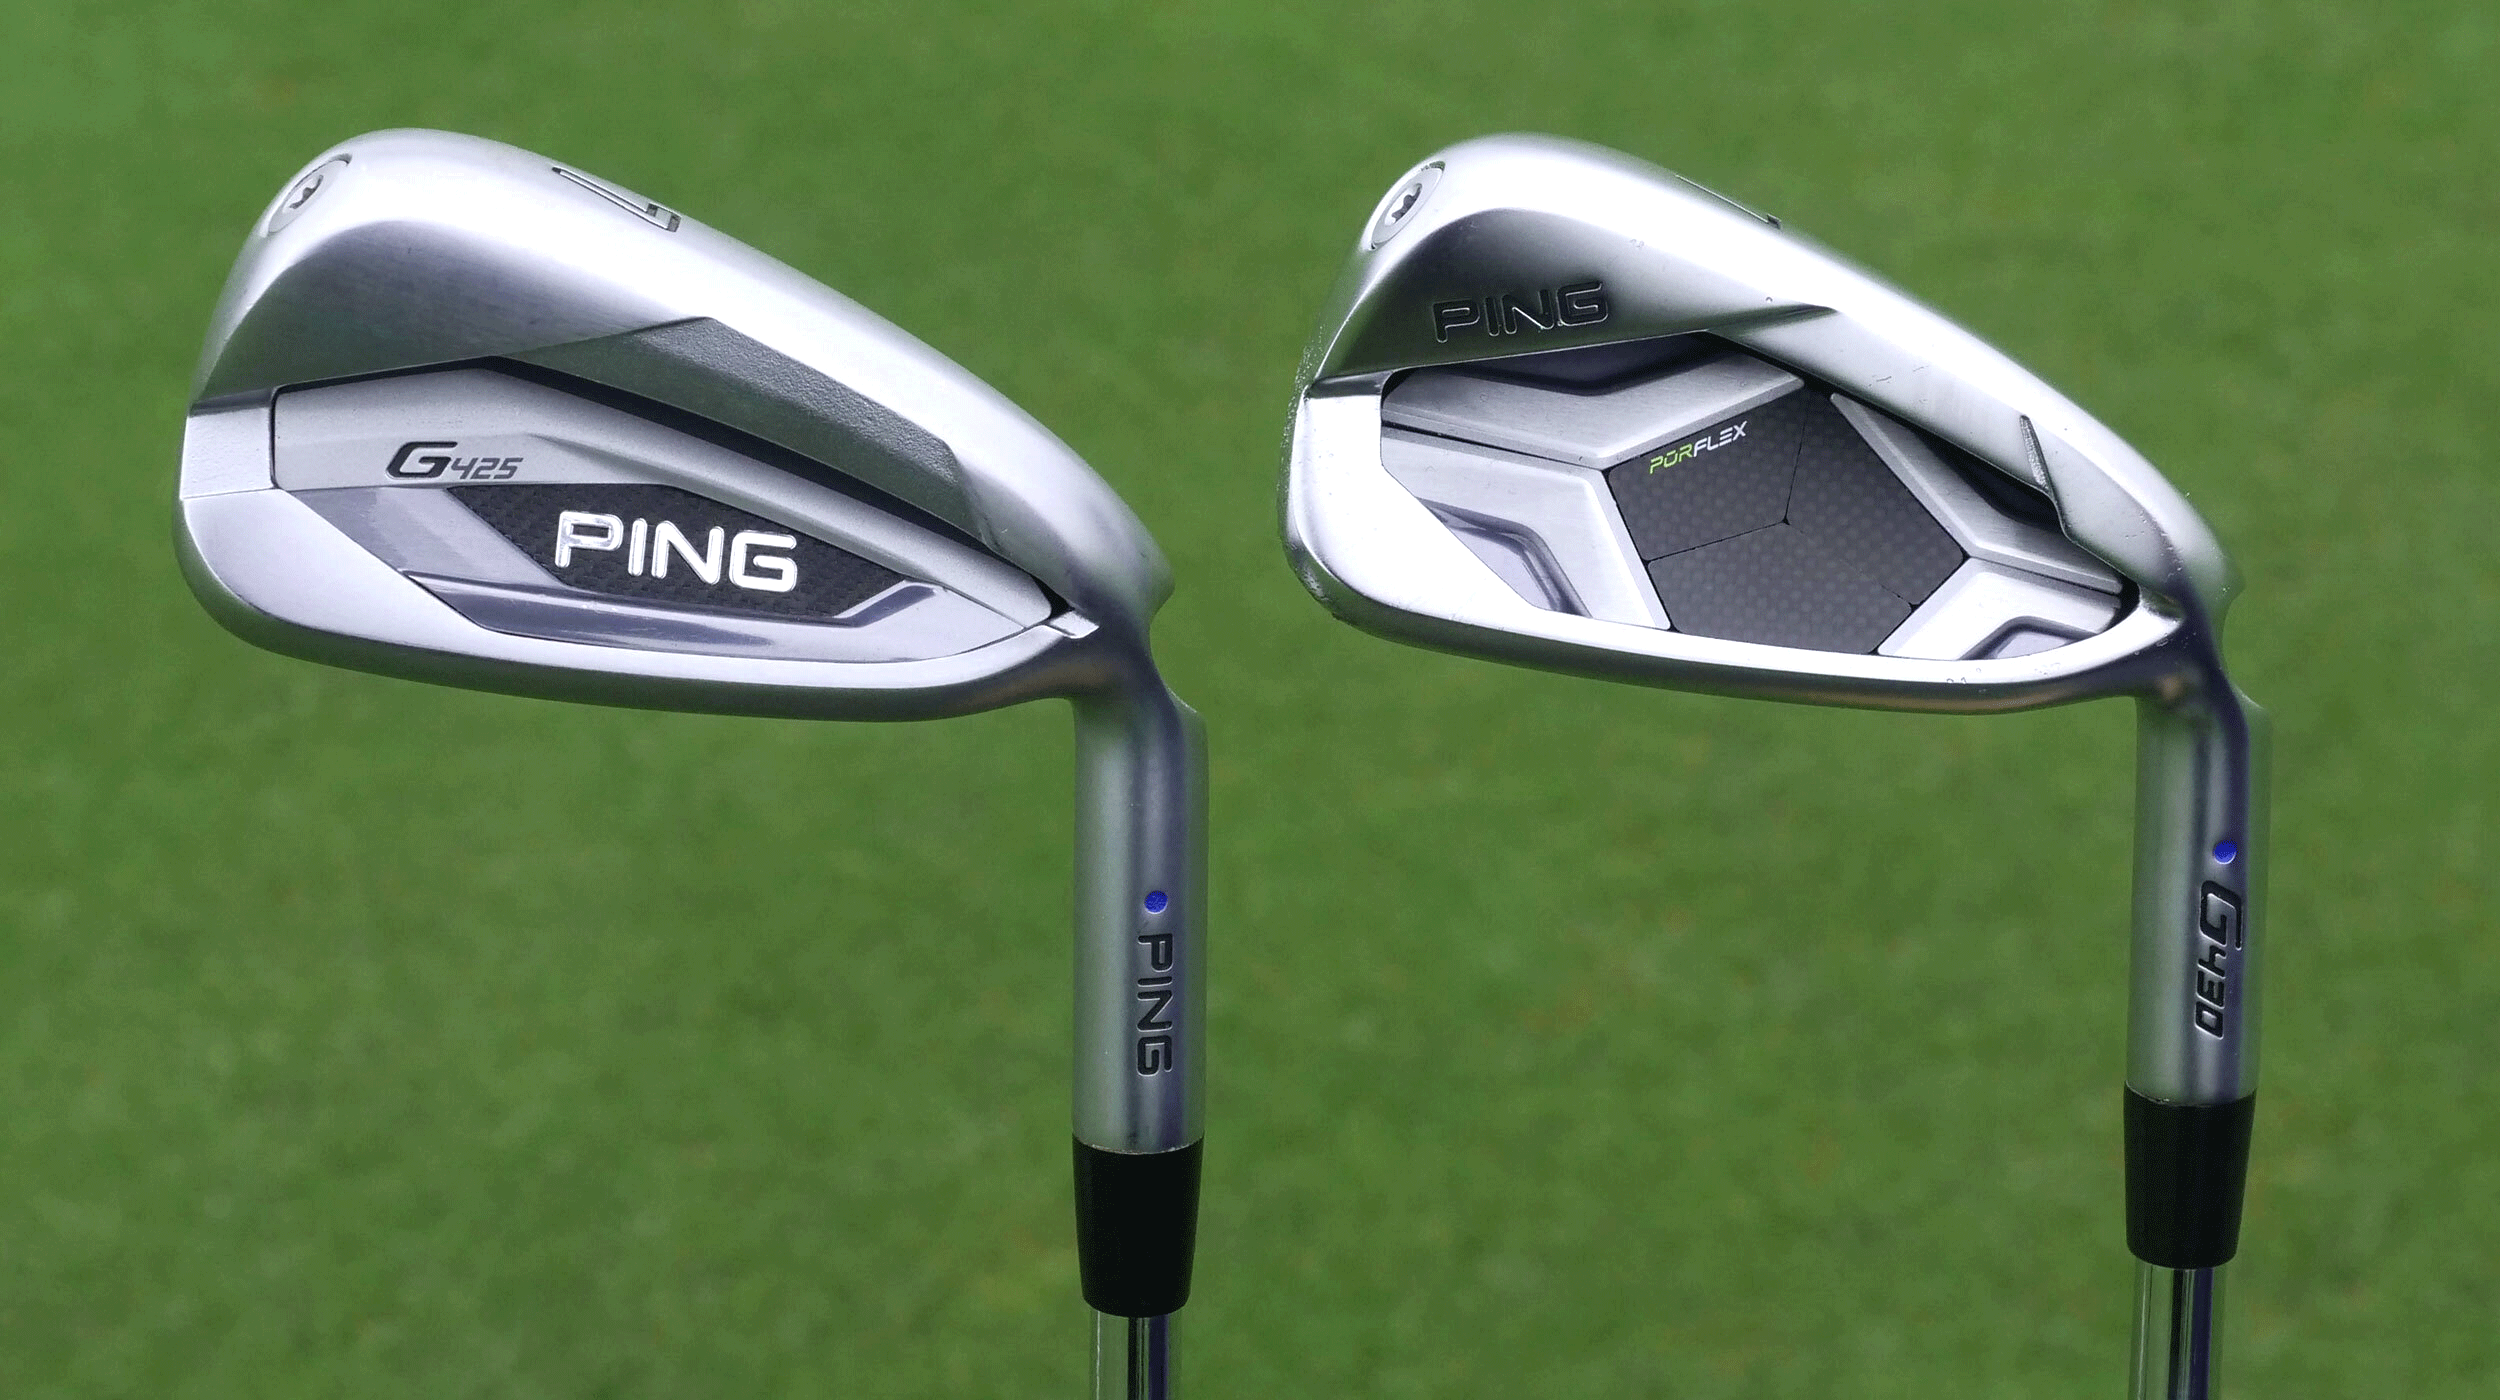 Photo of Ping G430 iron and Ping G425 Iron from the back